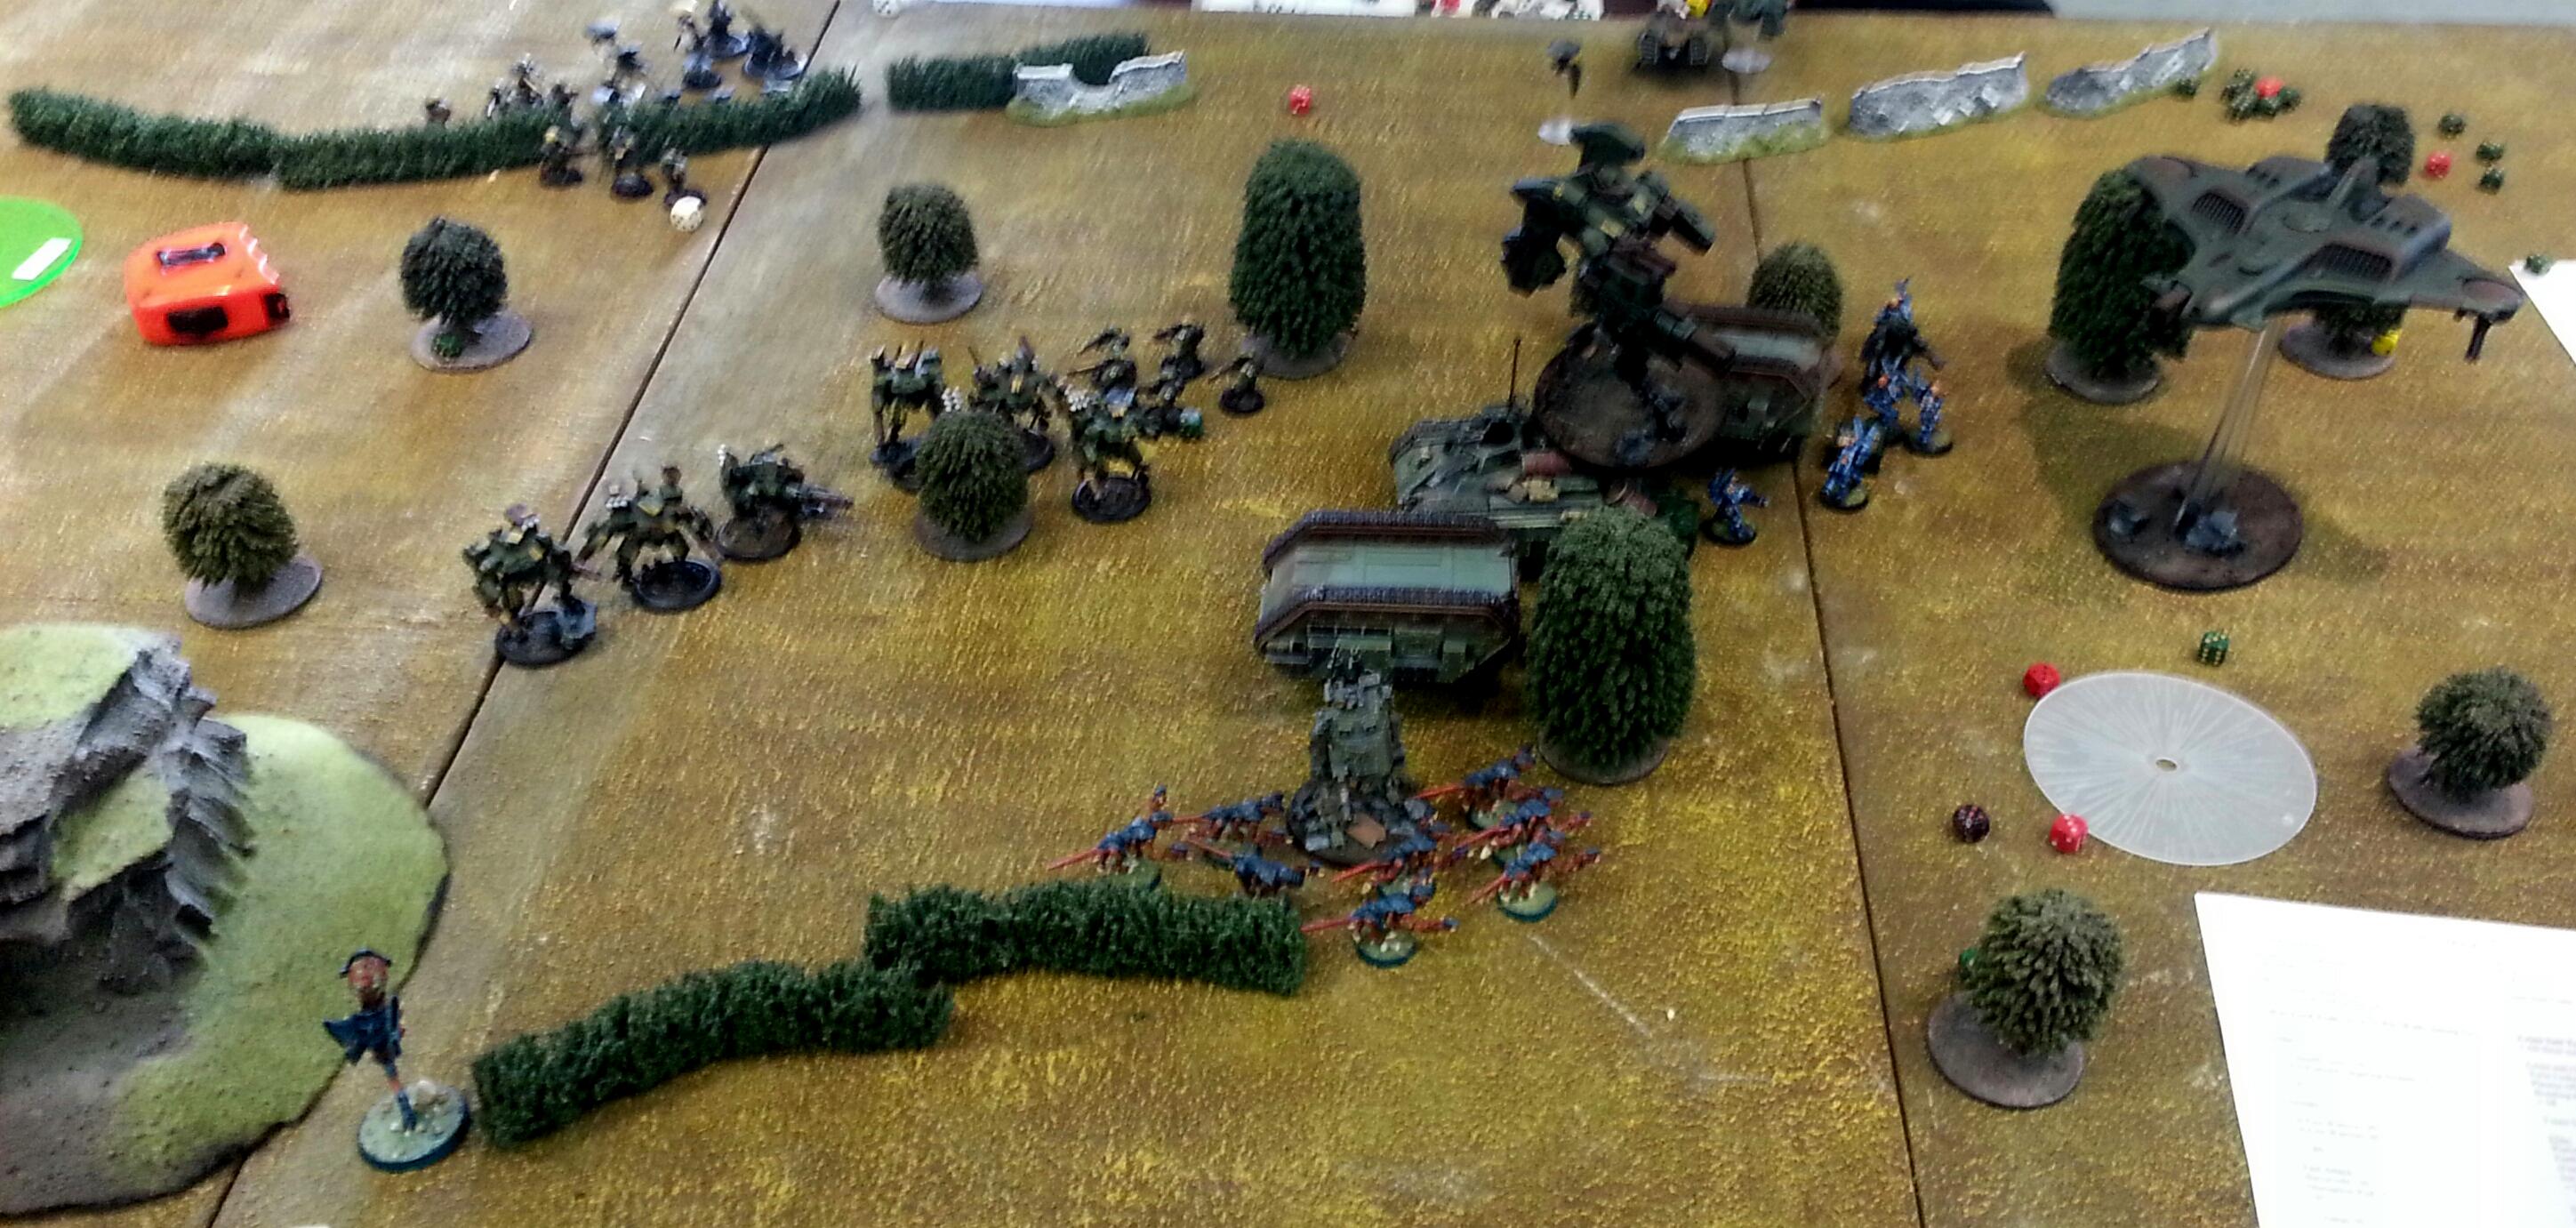 Tau, Tyranids, Tau Turn 4a: Assault moves and end of game